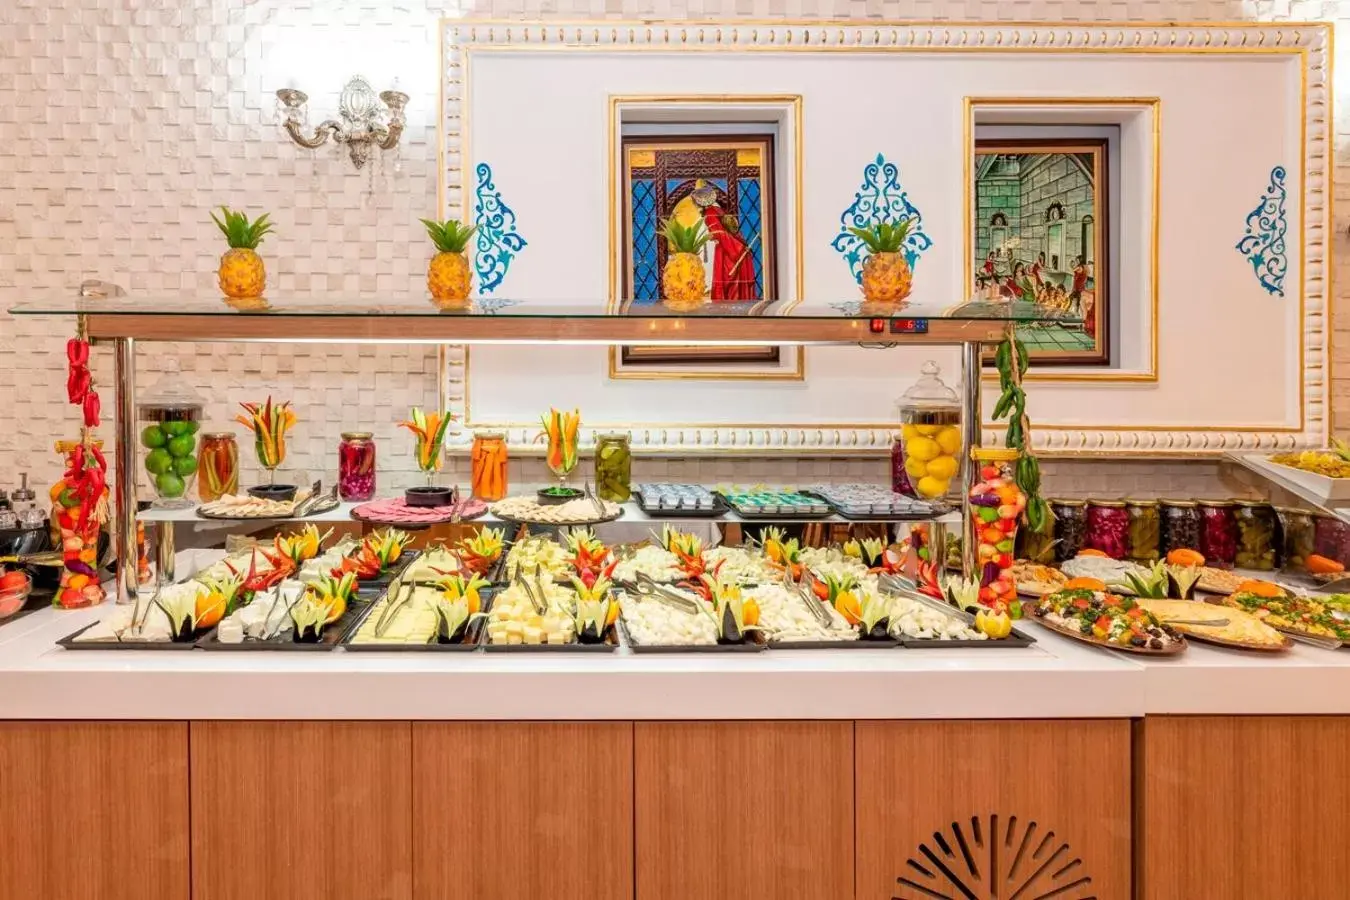 Buffet breakfast, Food in The Byzantium Suites Hotel & Spa